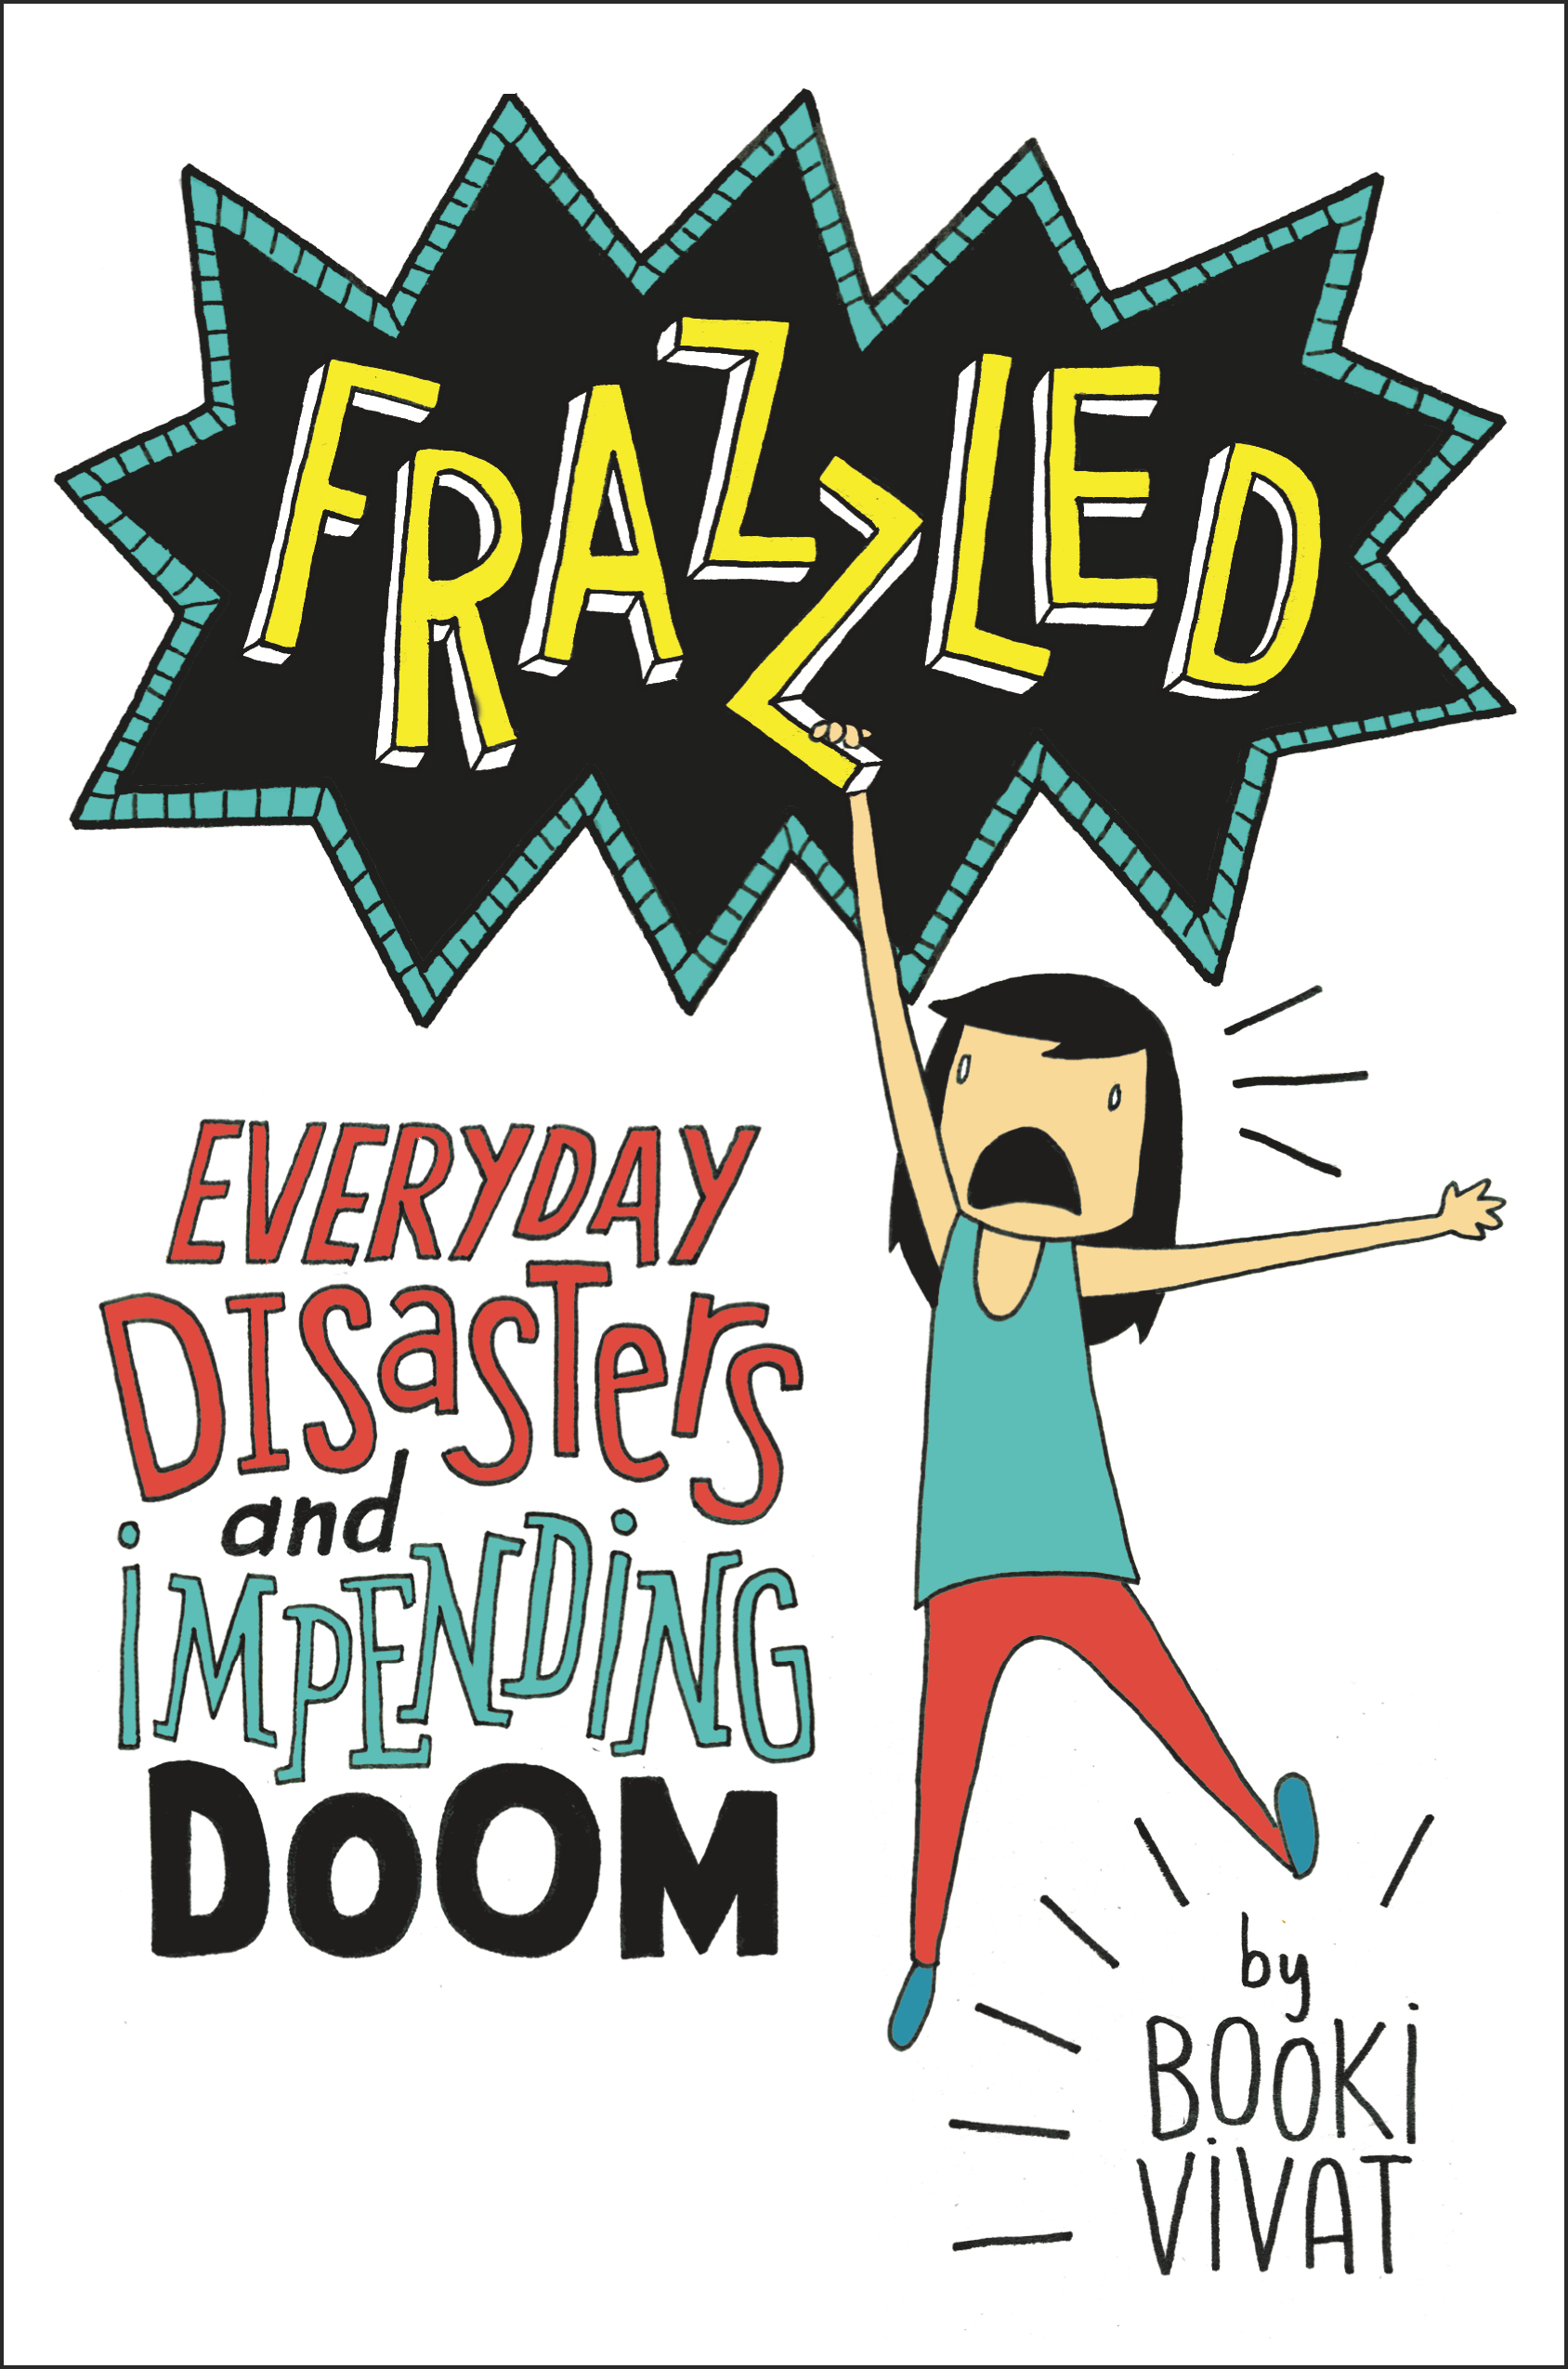 Frazzled Everyday Disasters and Impending Doom